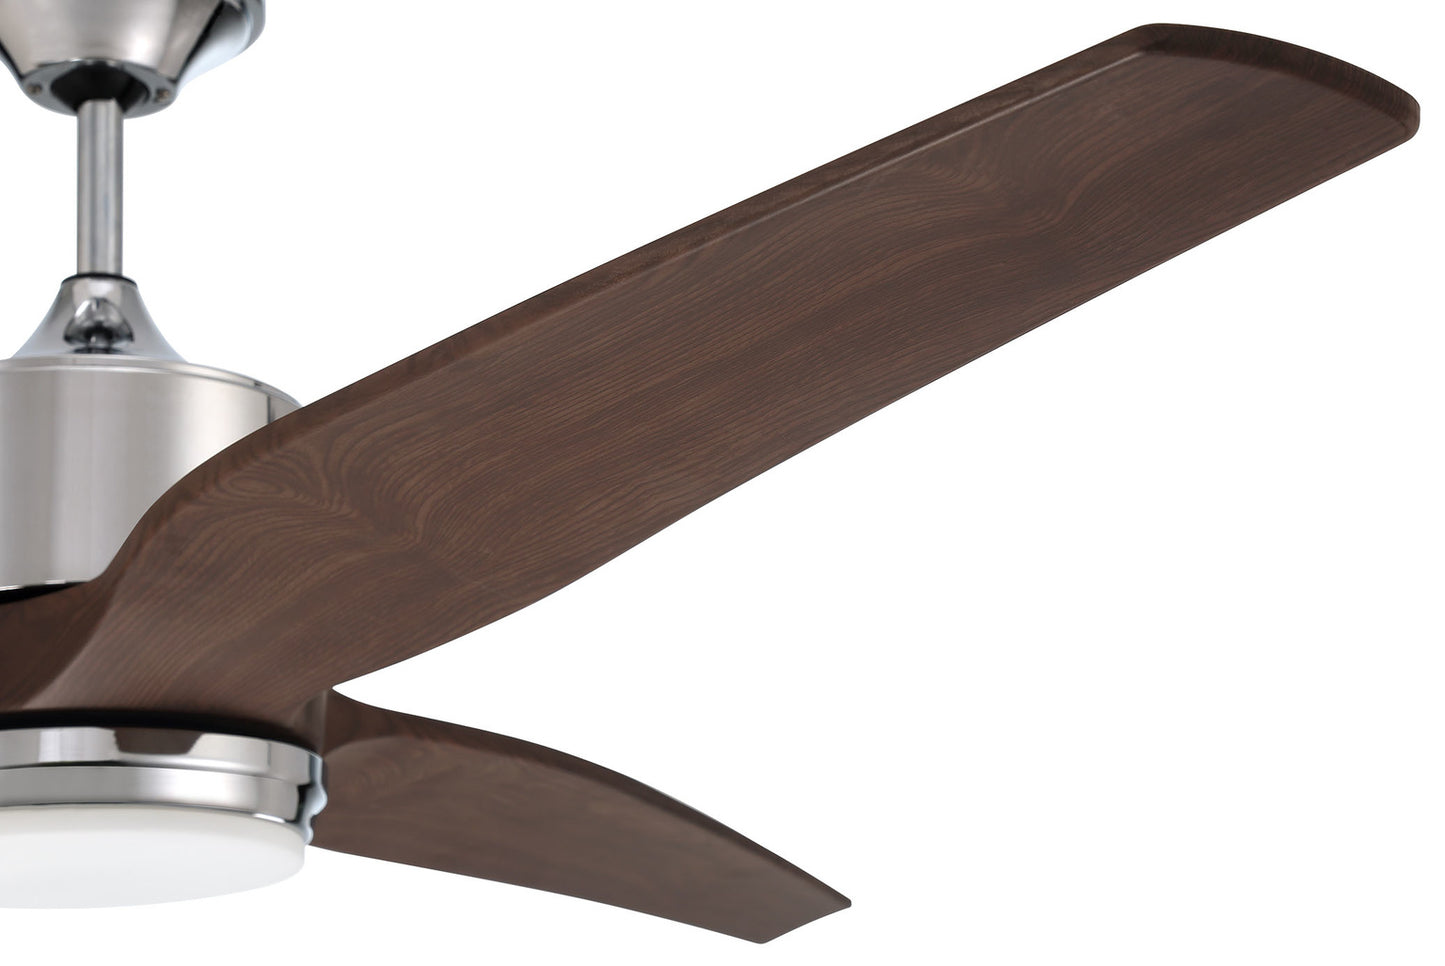 Craftmade - 60" Mobi Ceiling Fan in Chrome Finish with 3 ABS custom walnut blades, remote and LED Light included